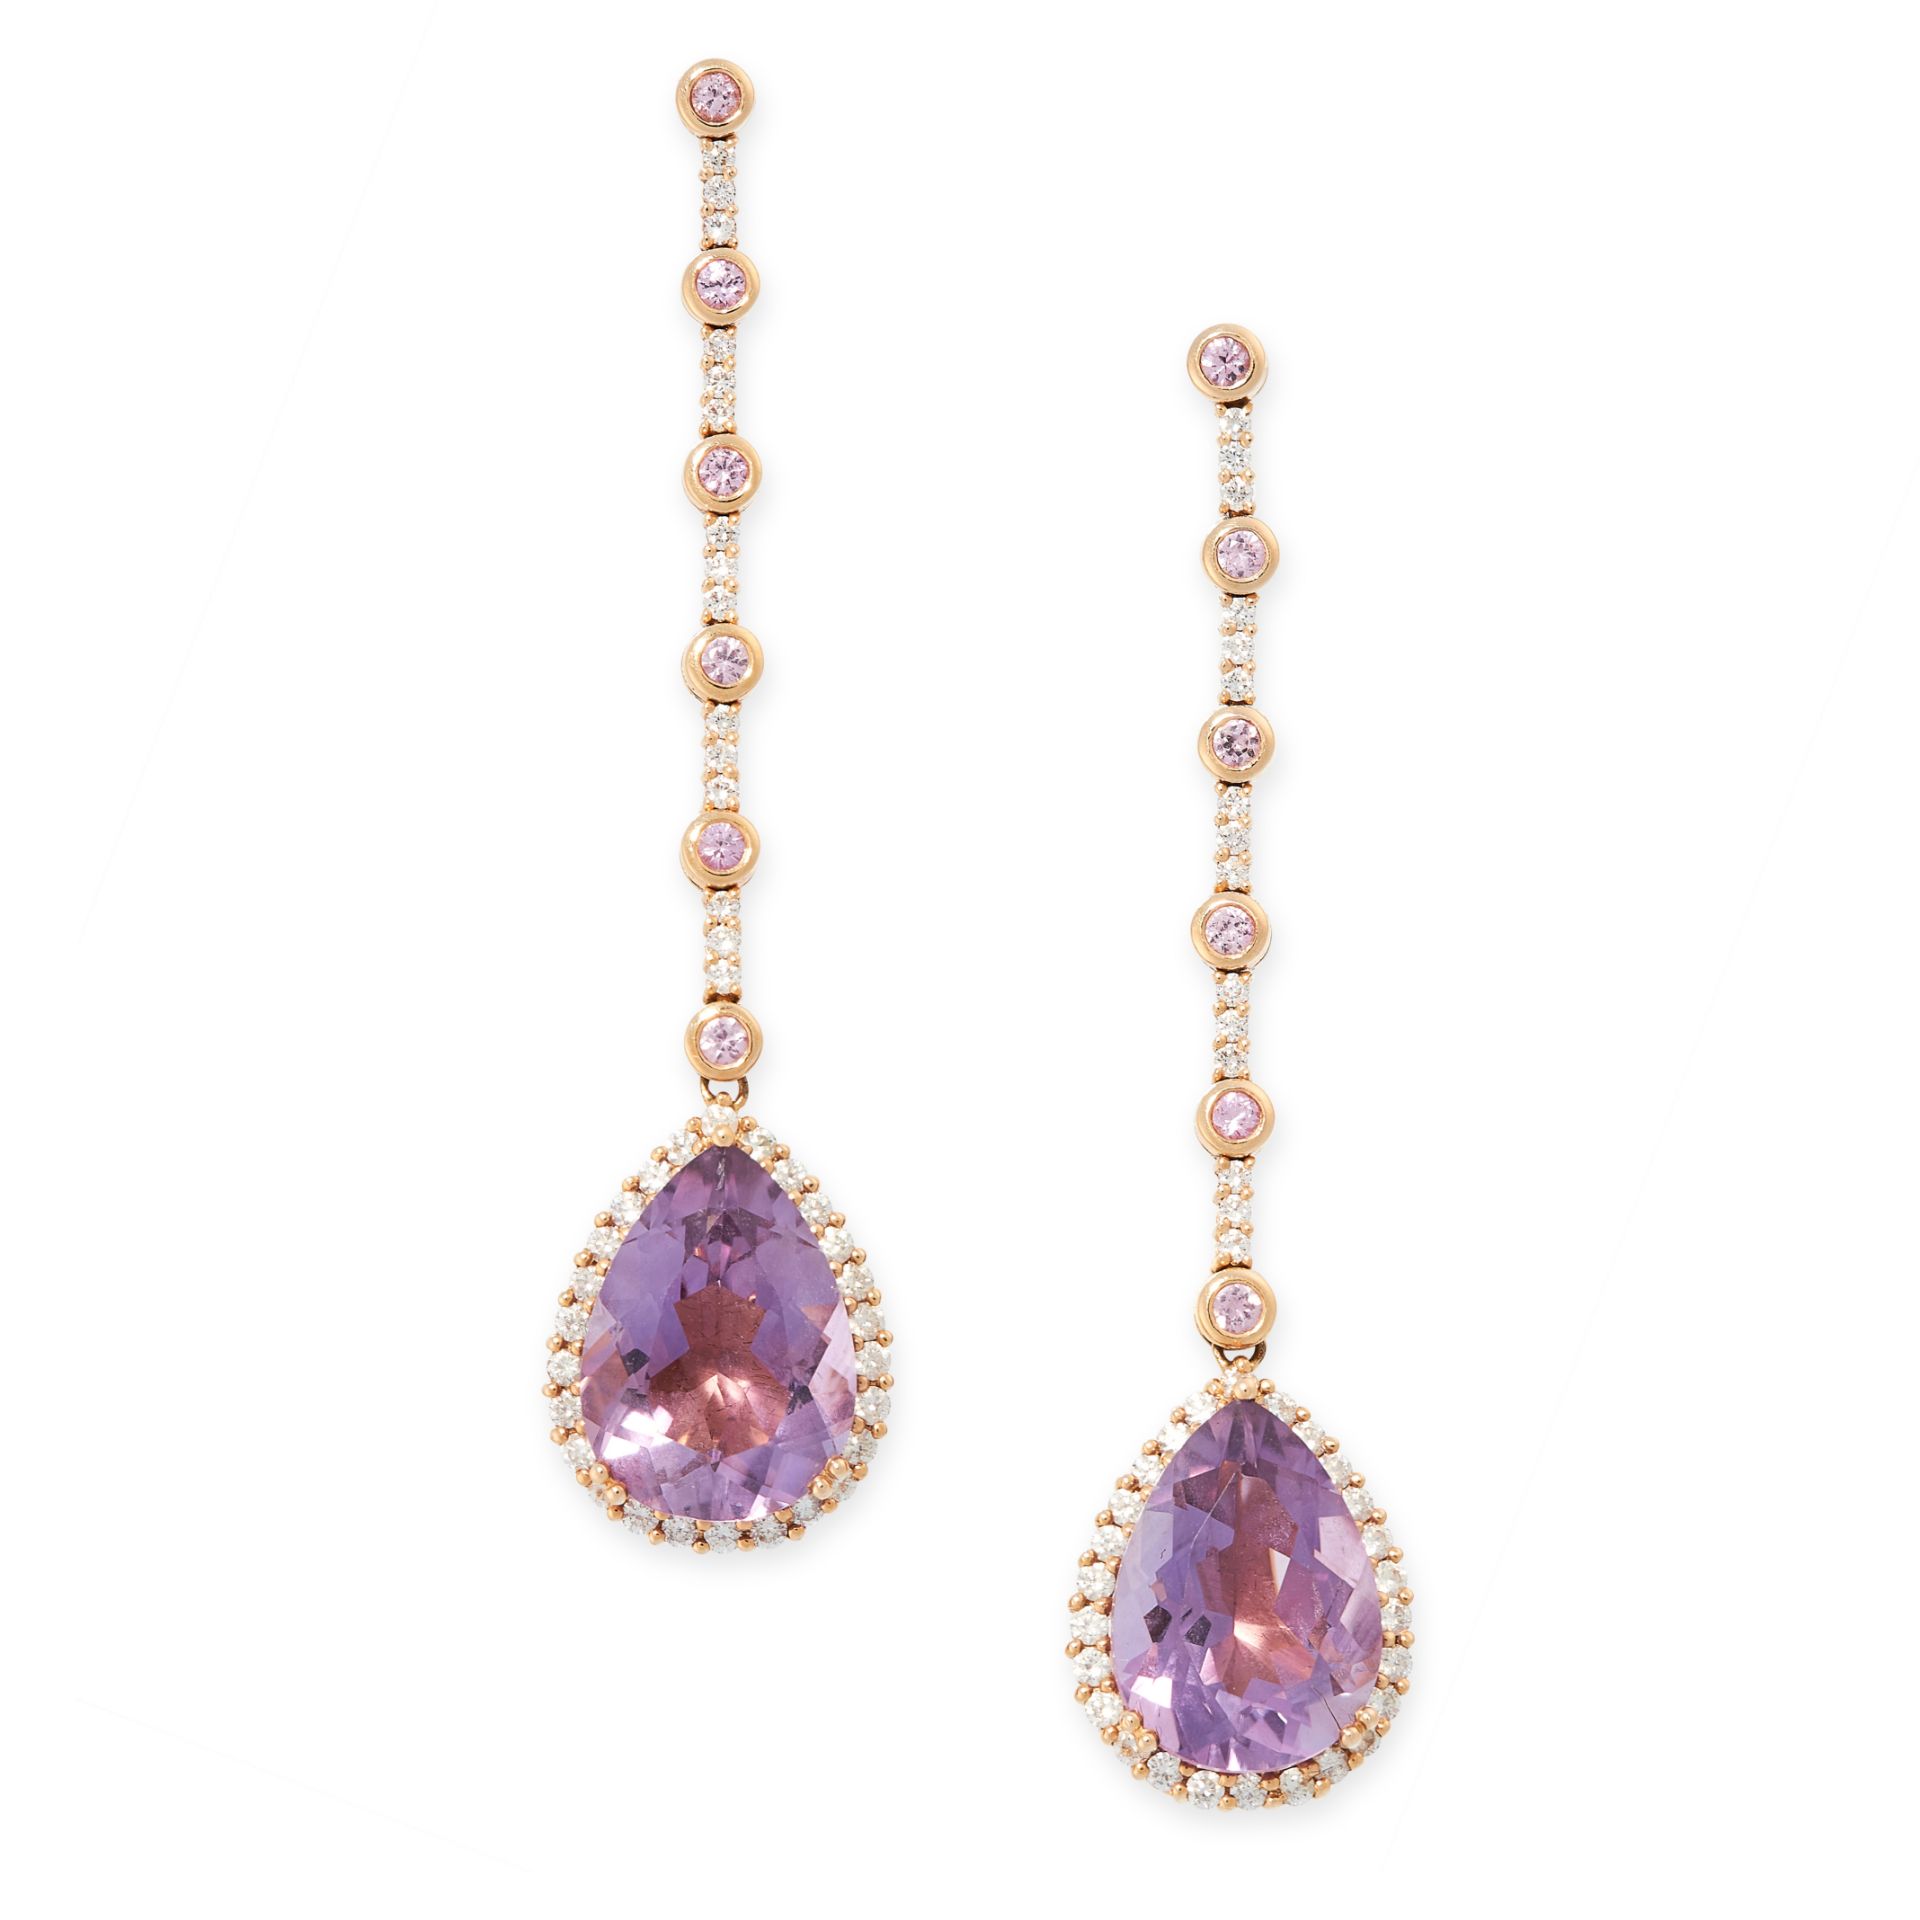 A PAIR OF AMETHYST, PINK SAPPHIRE AND DIAMOND EARRINGS each set with a pear cut amethyst is a border